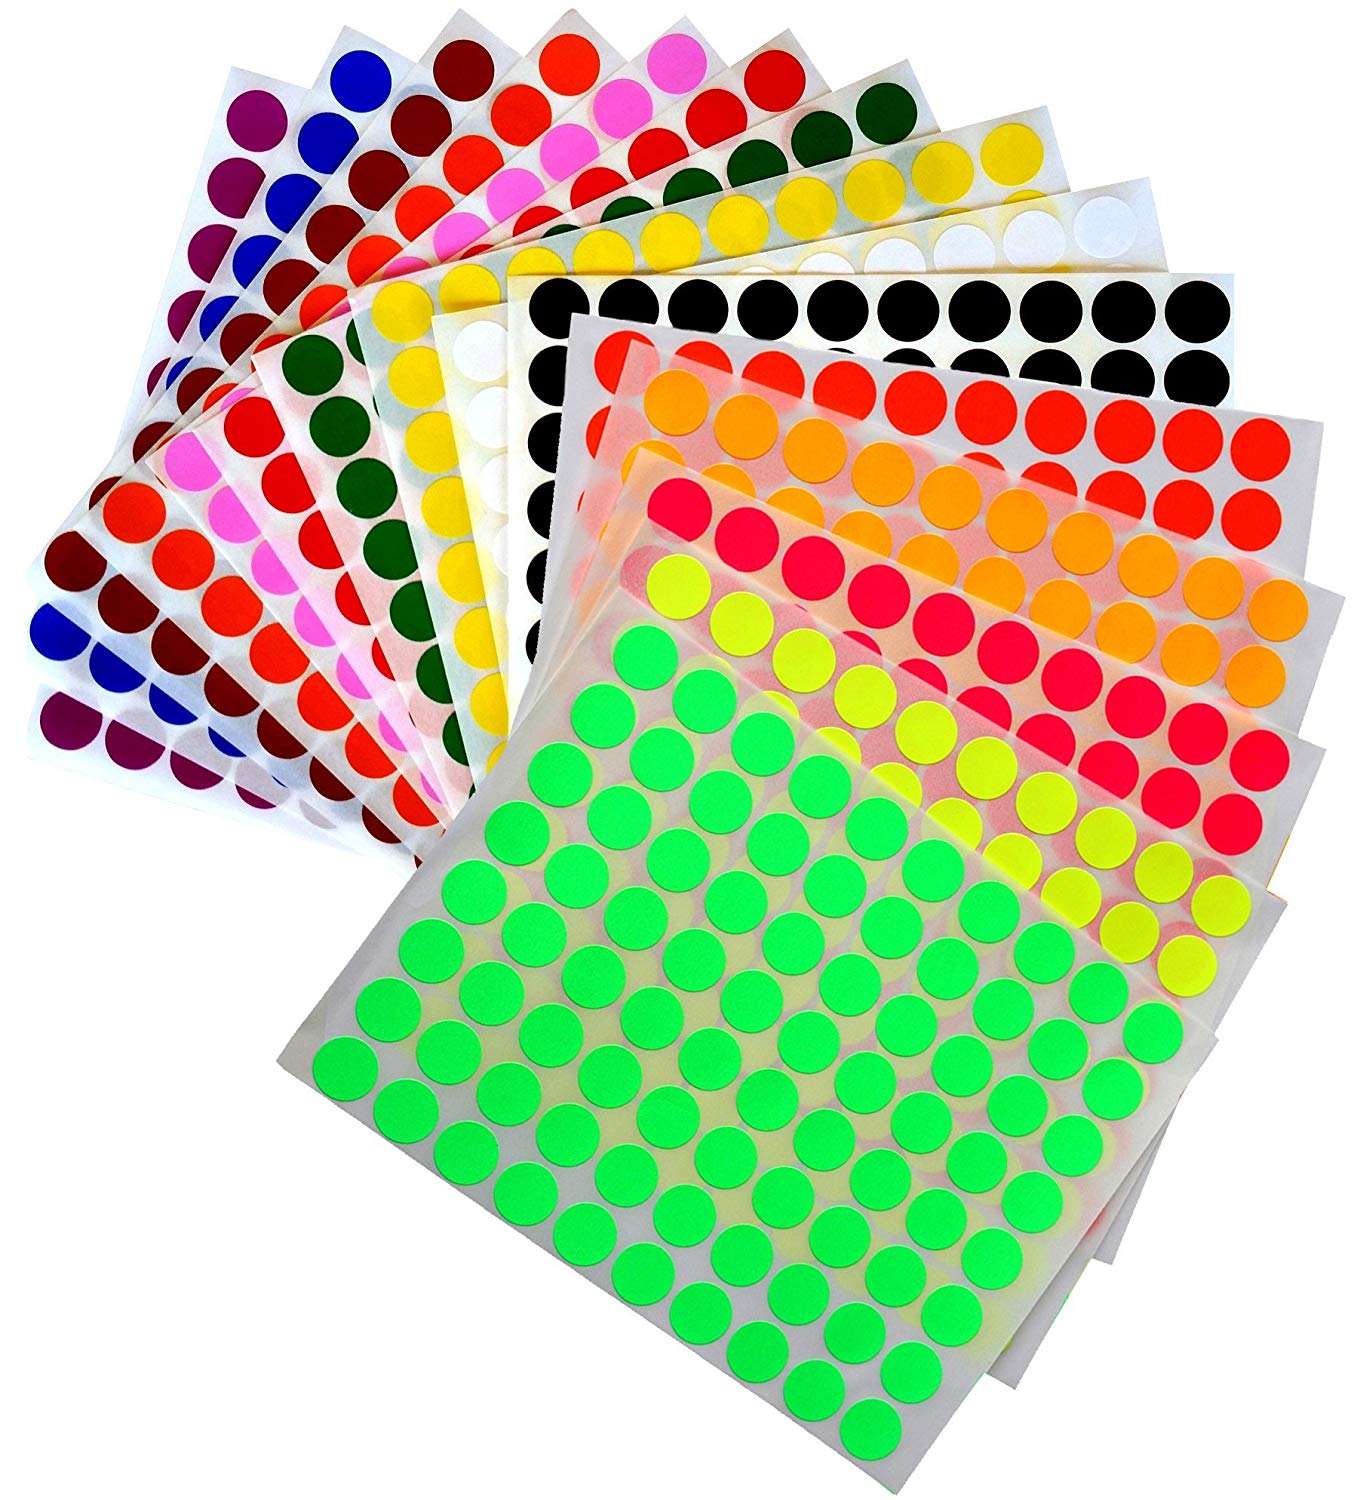 Round Stickers in 10 Assorted Colors Colored Sticker Dots Coding